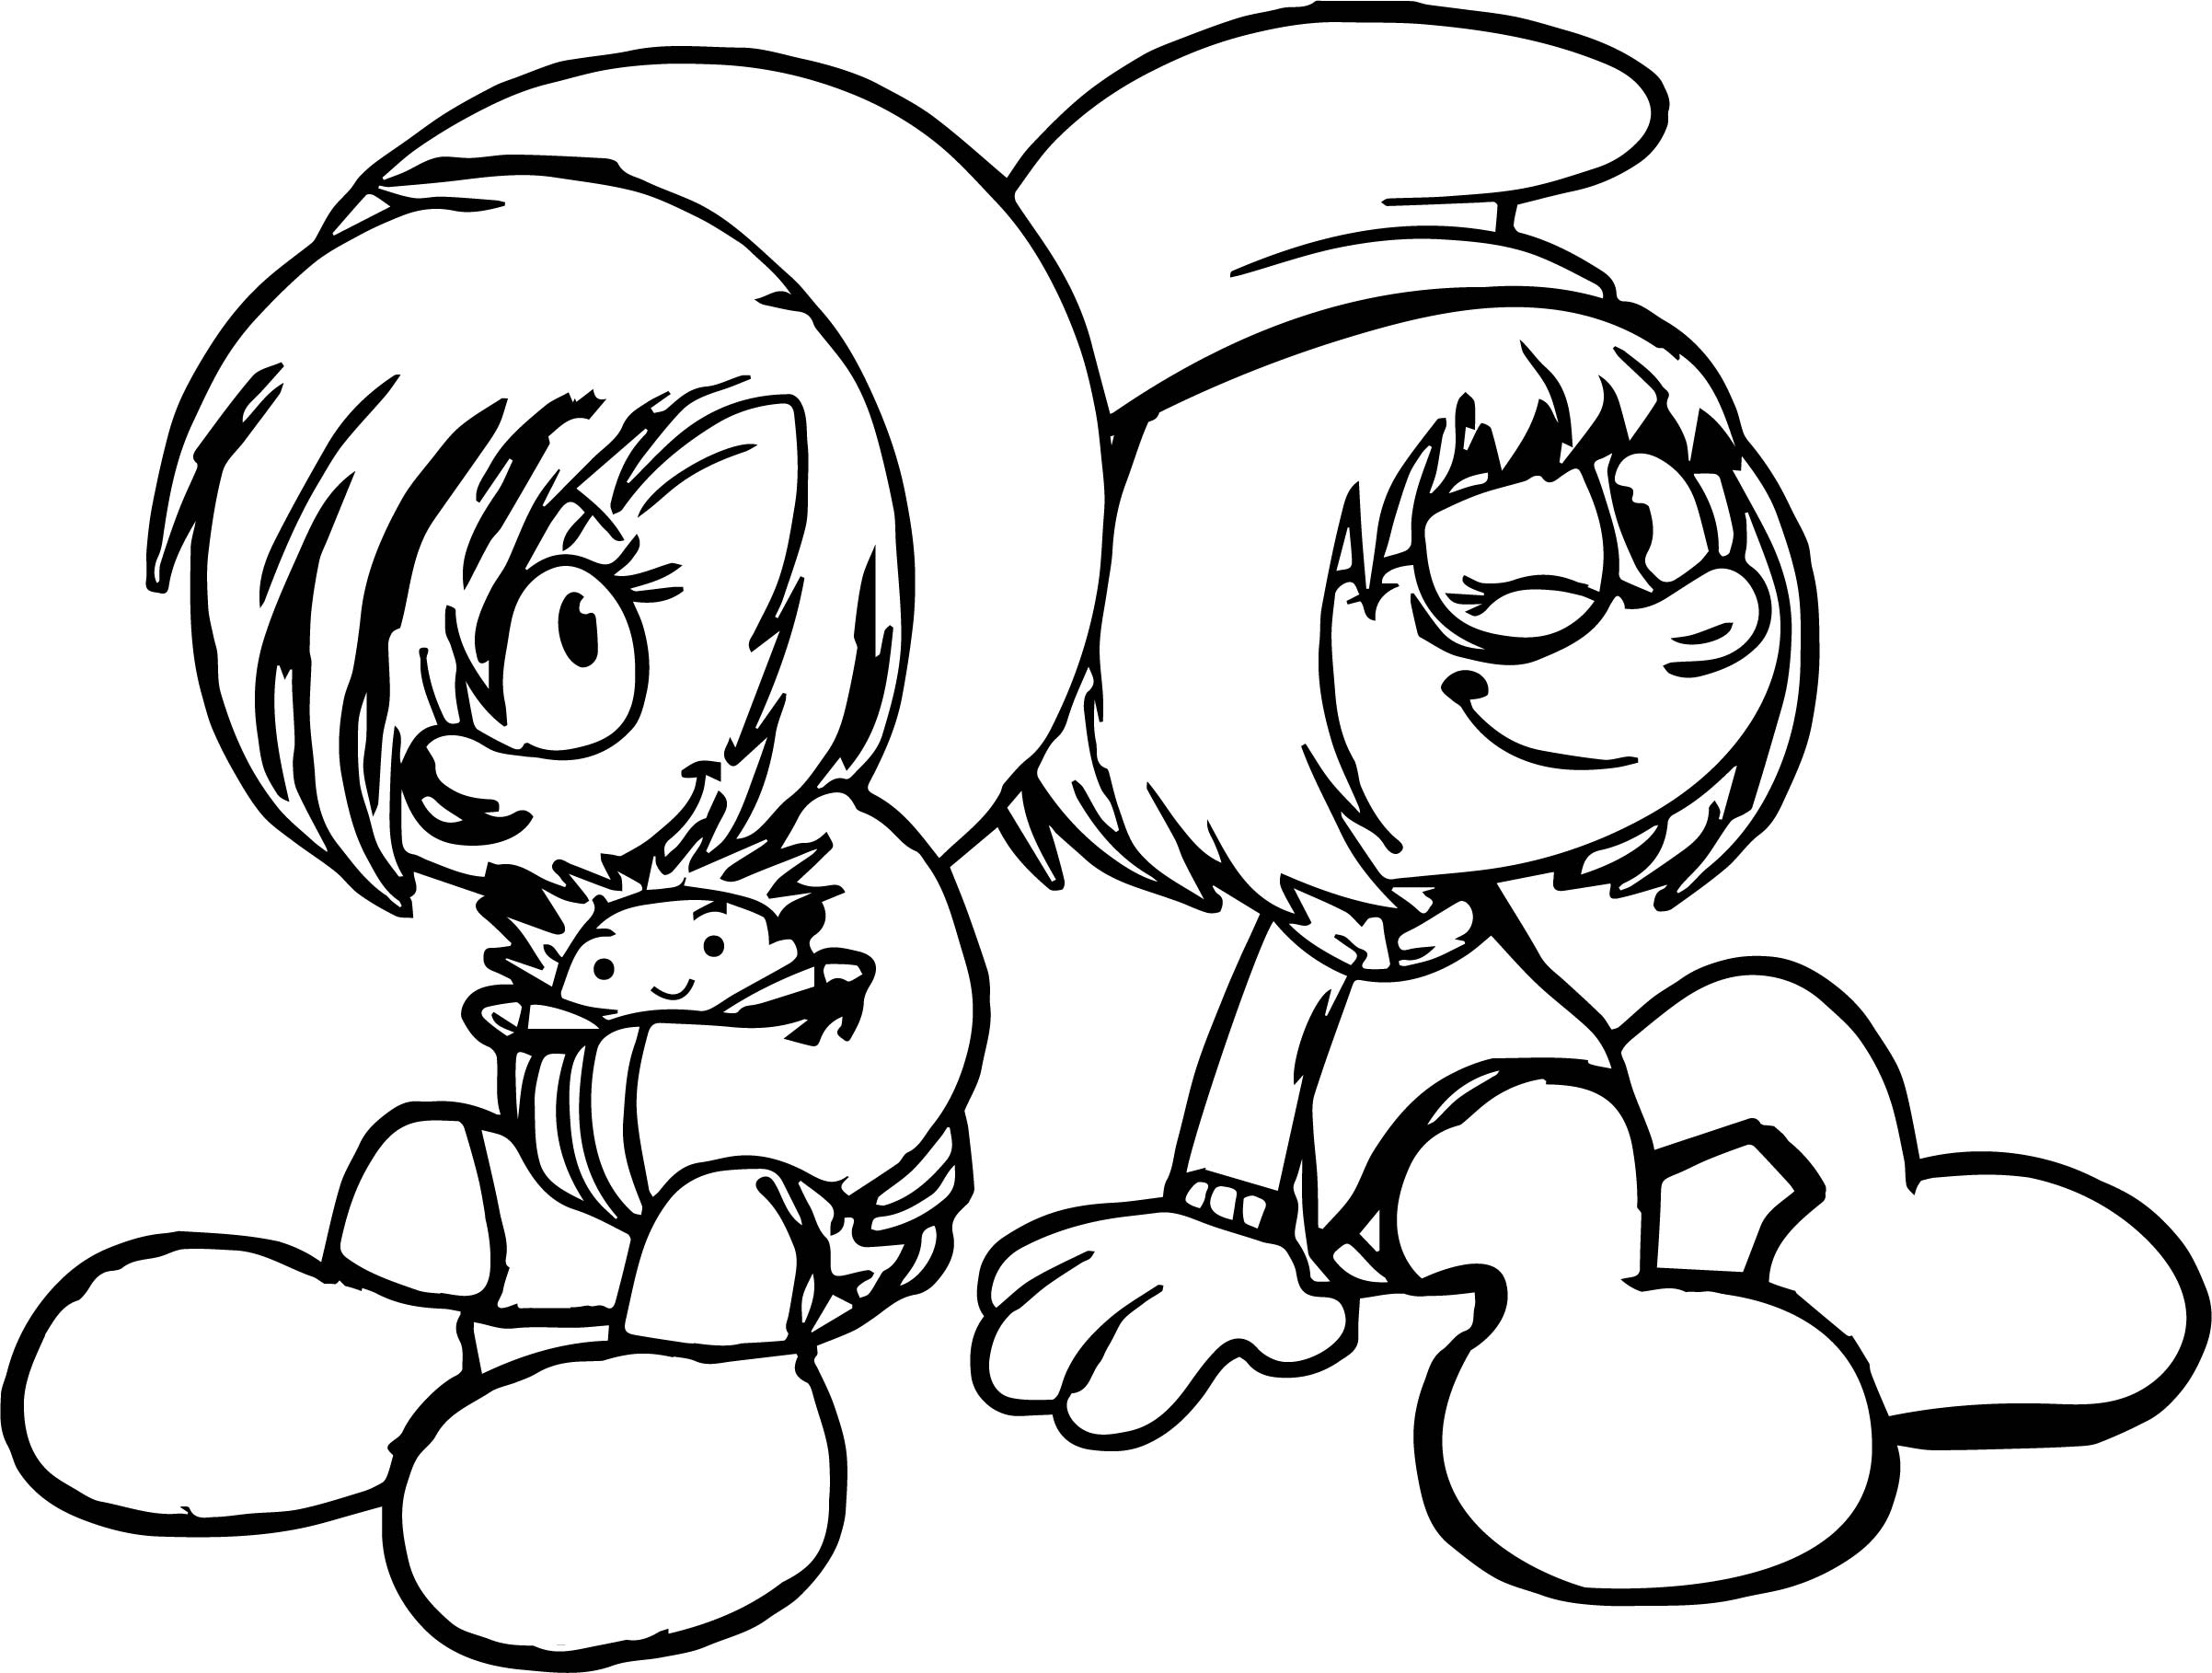 Just Sitting Shini Smurf Coloring Page